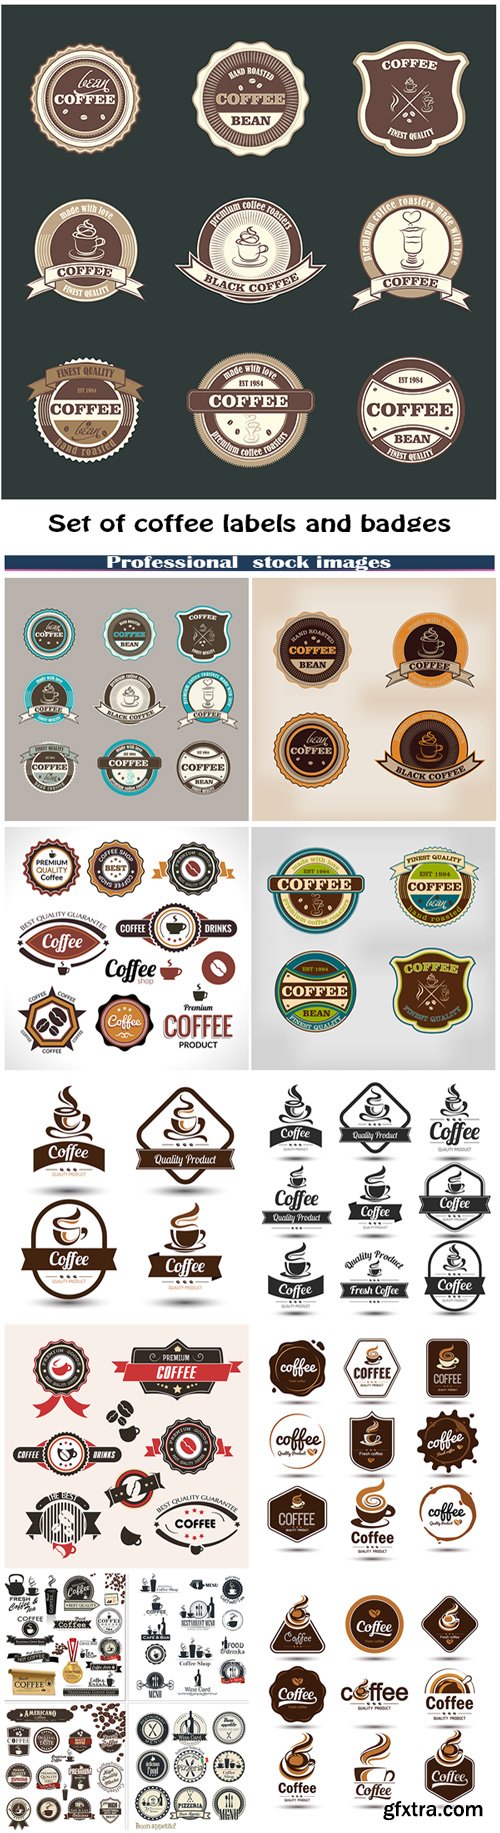 Set of coffee labels and badges